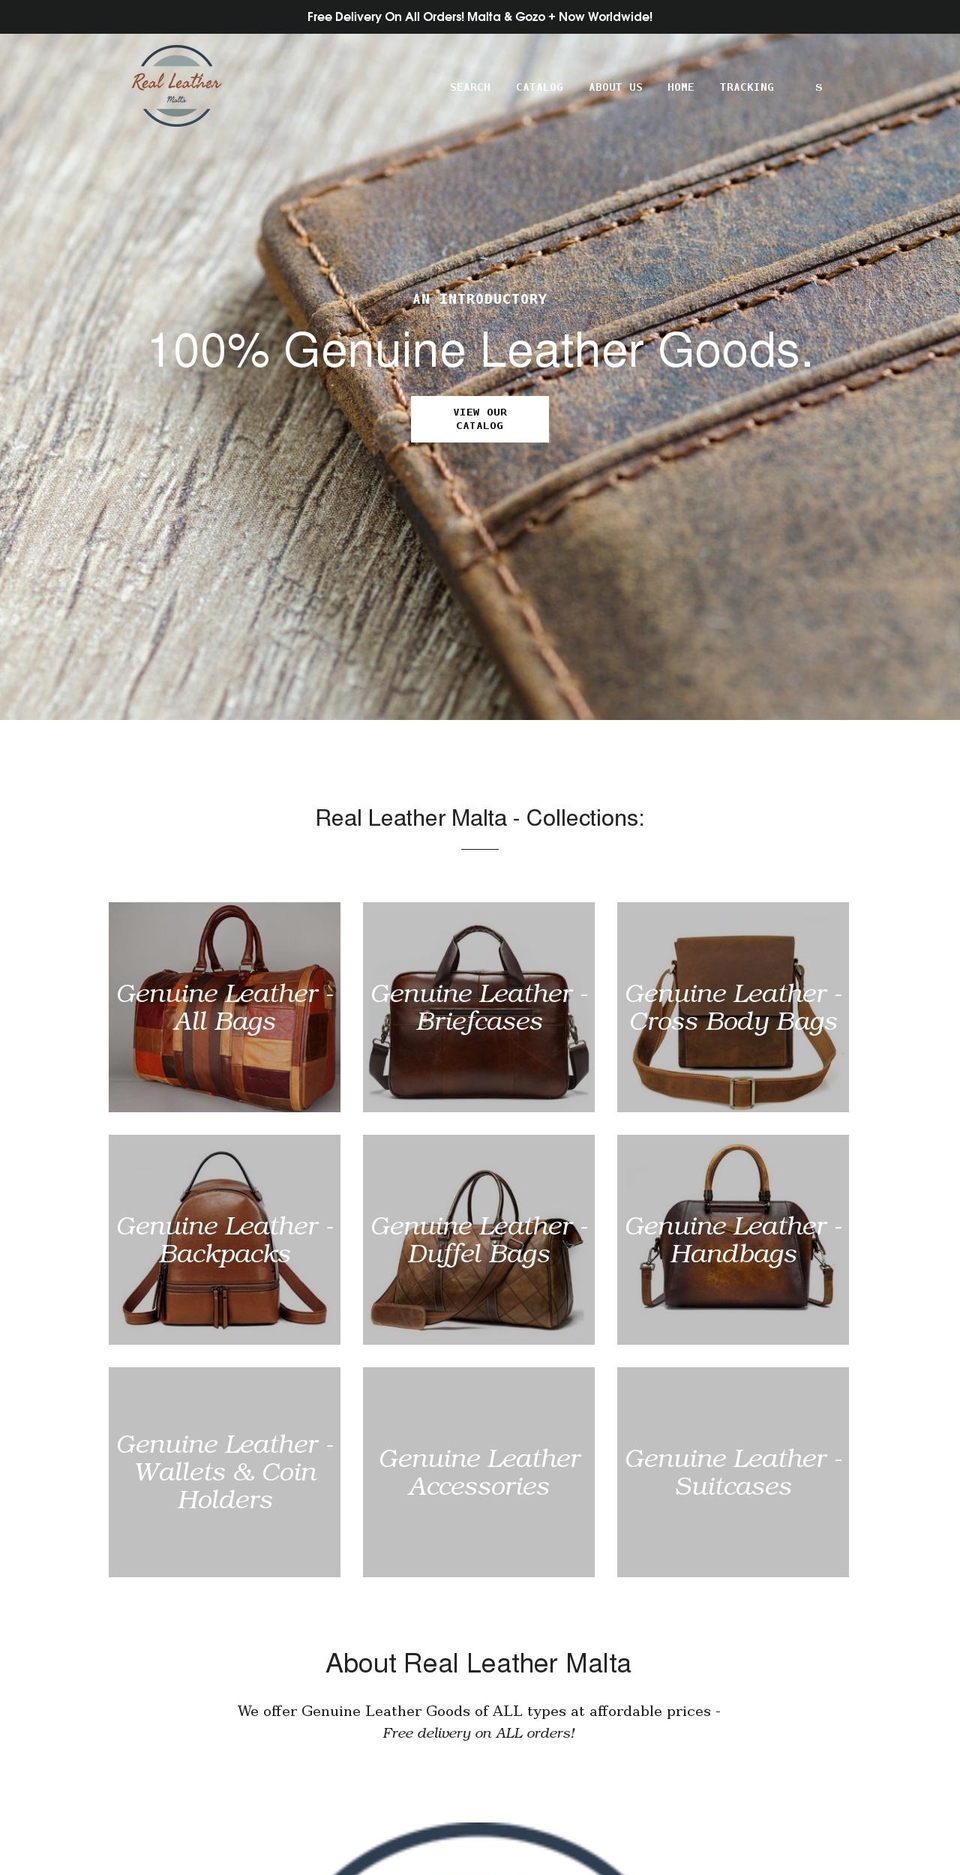 Leather Shopify theme site example realleathermalta.com